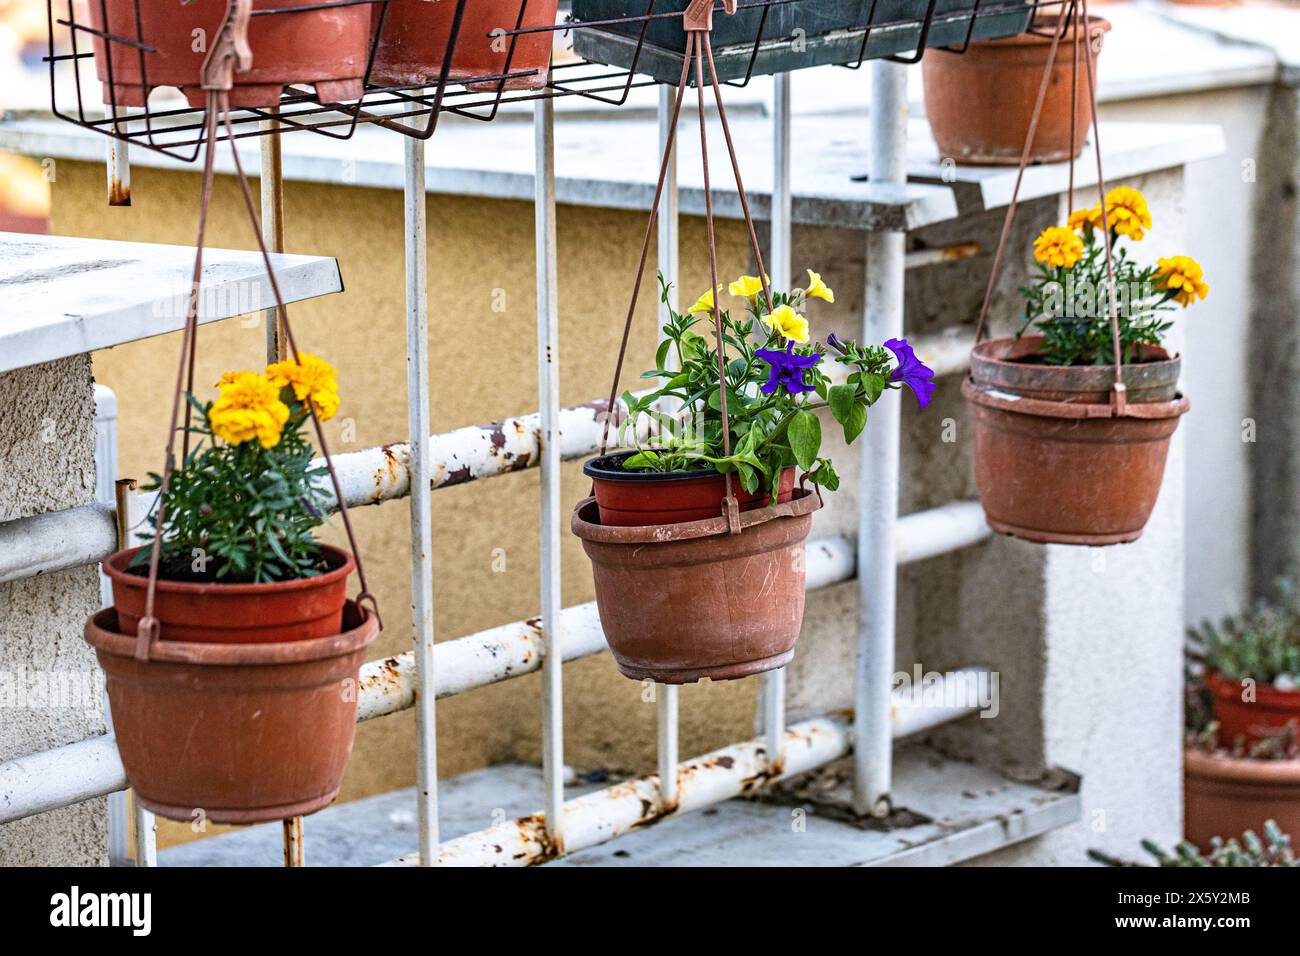 Yellow marigolds and blue petunias in pots on the terrace.Herb decor, aromatic balcony arrangement. Stock Photo